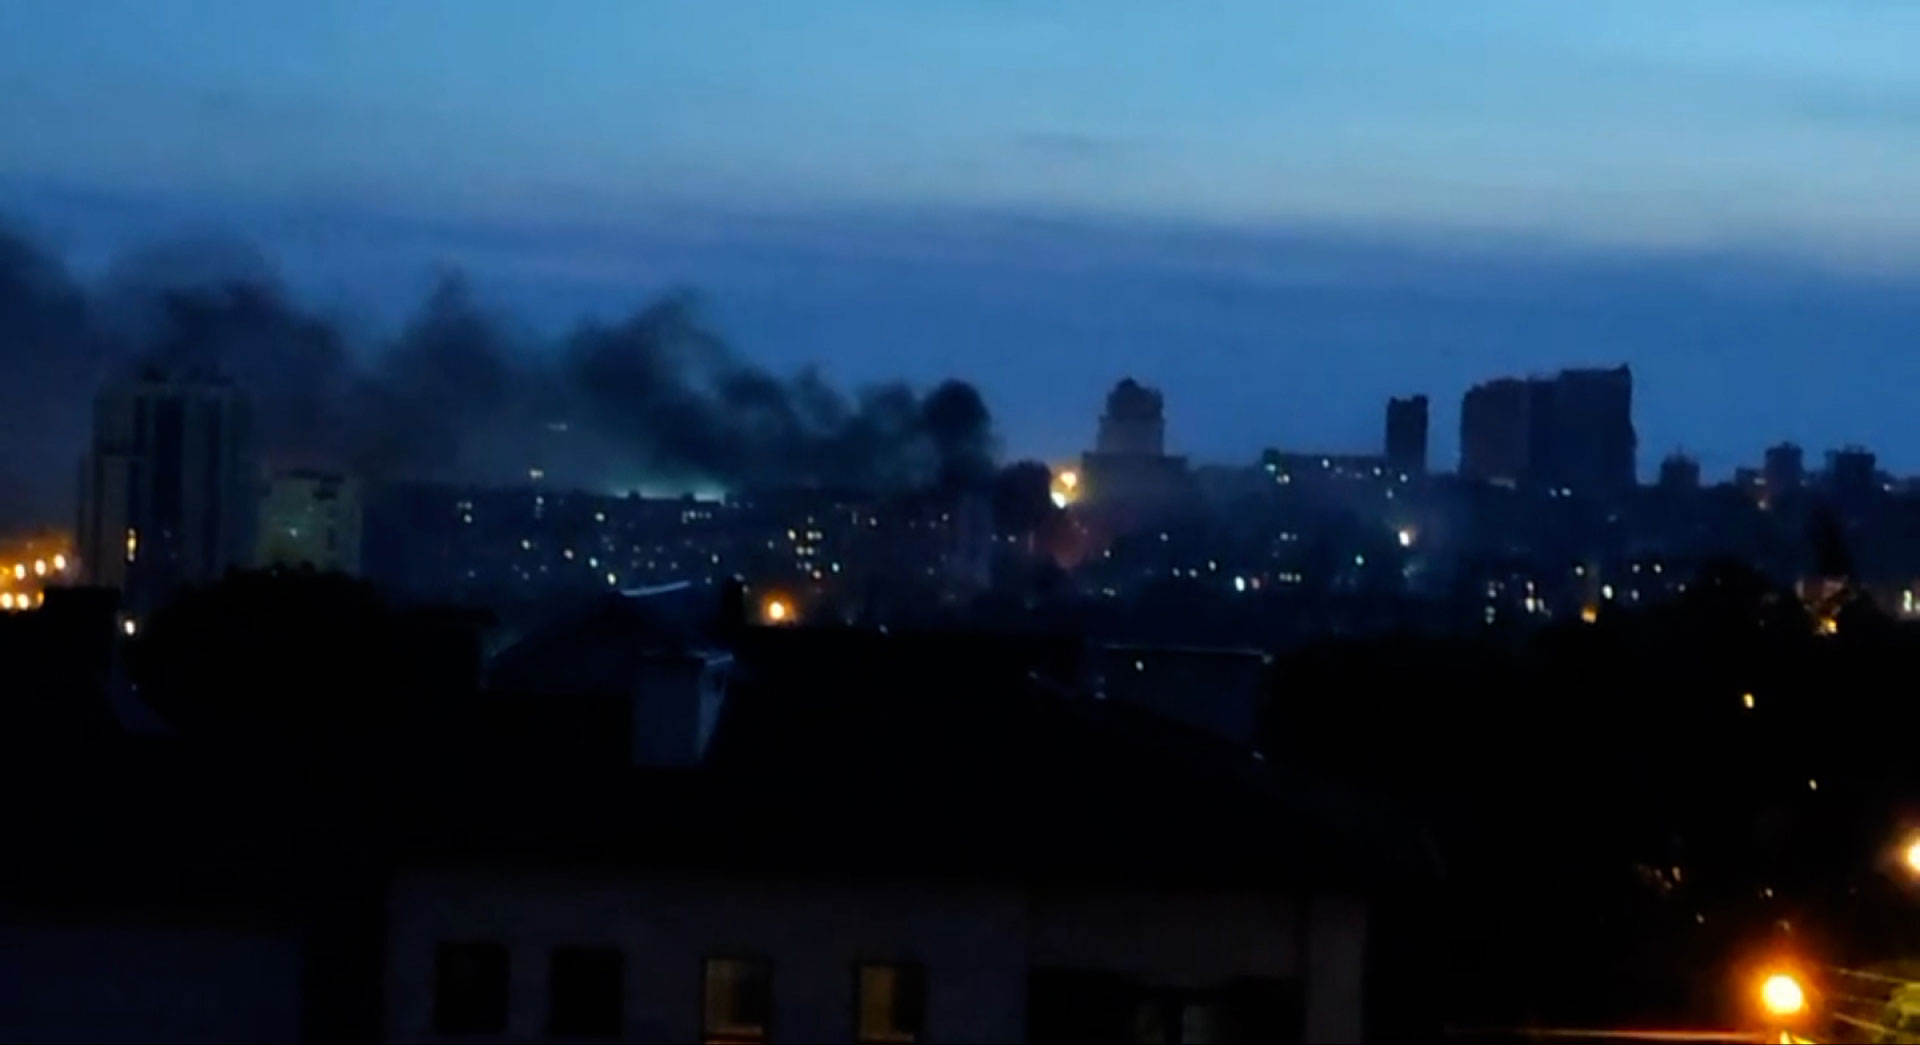 The city of Donetsk at dusk after explosions, on Saturday.